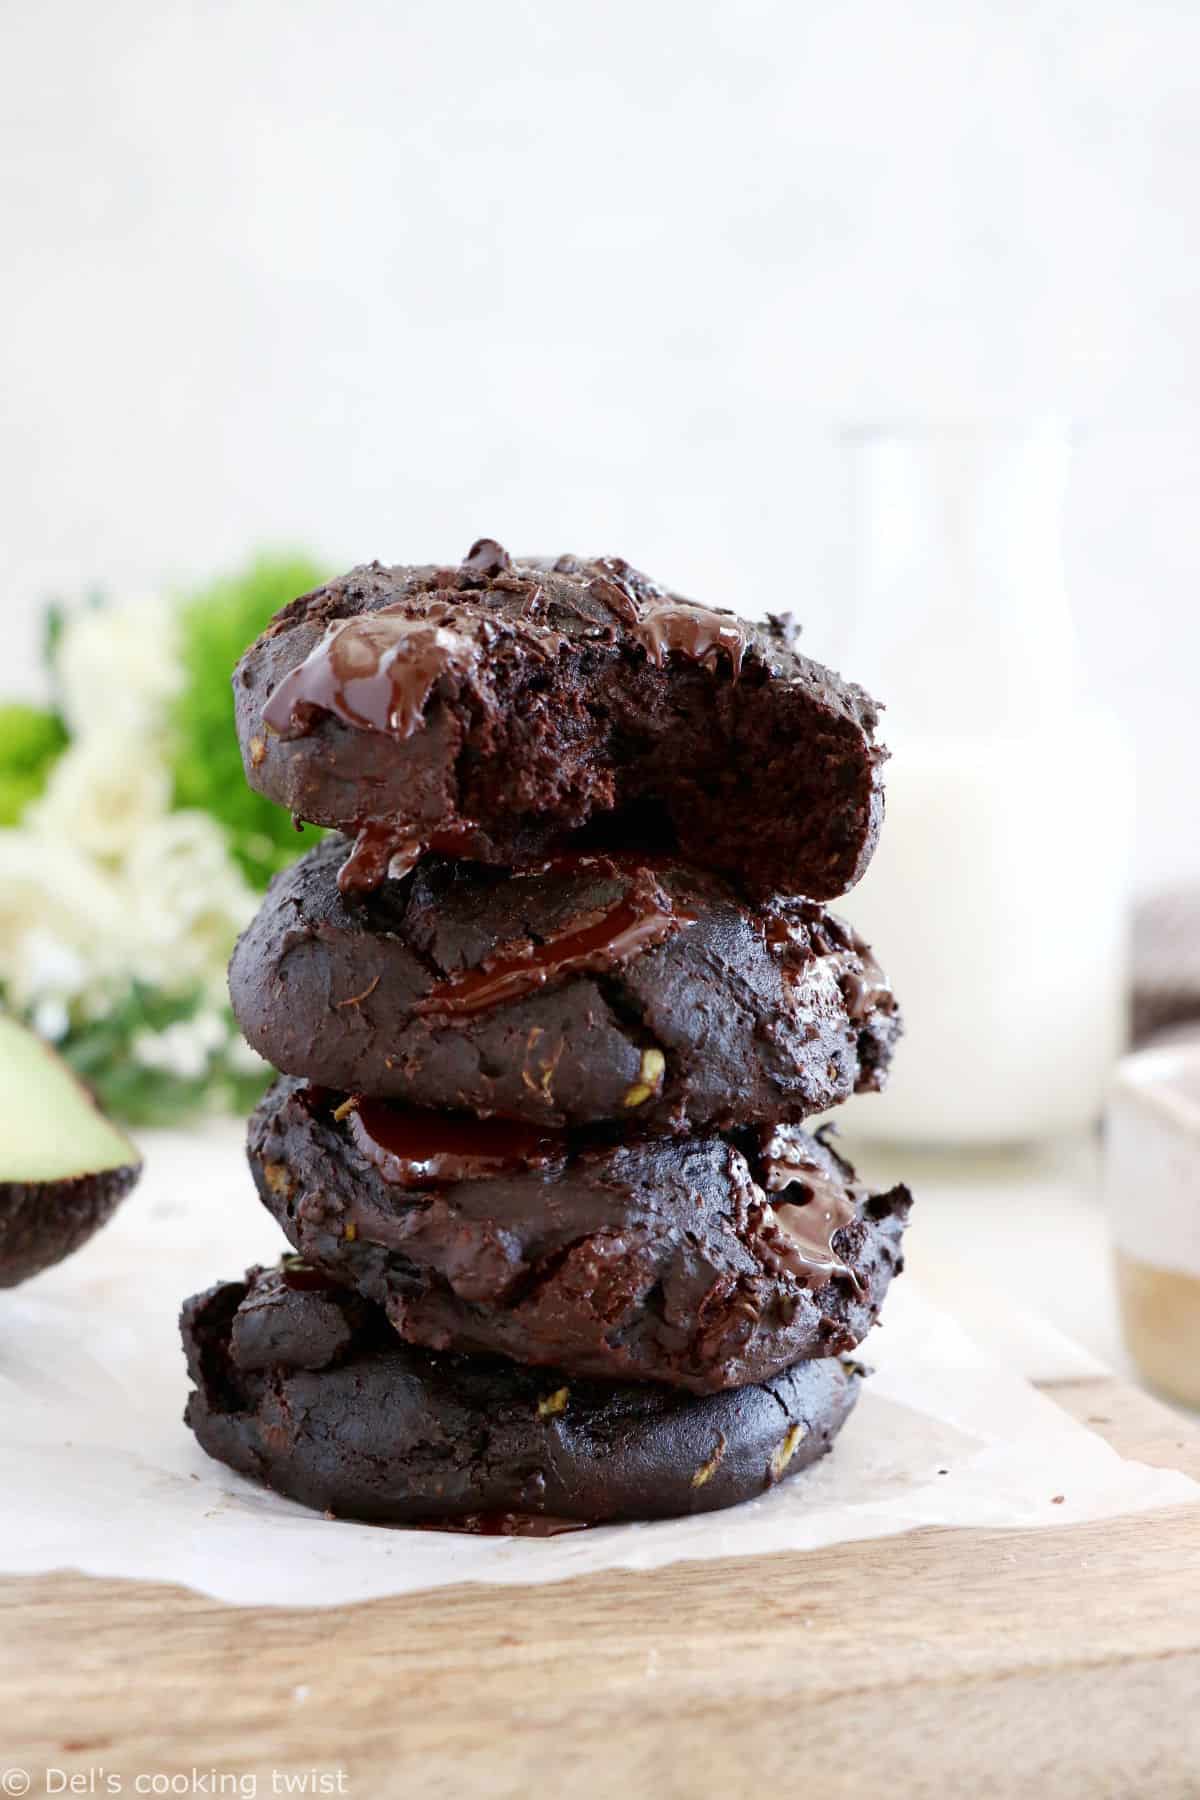 Rich, fudgy, with an intense chocolate flavor, these healthy chocolate avocado cookies are the answer to your chocolate cravings.